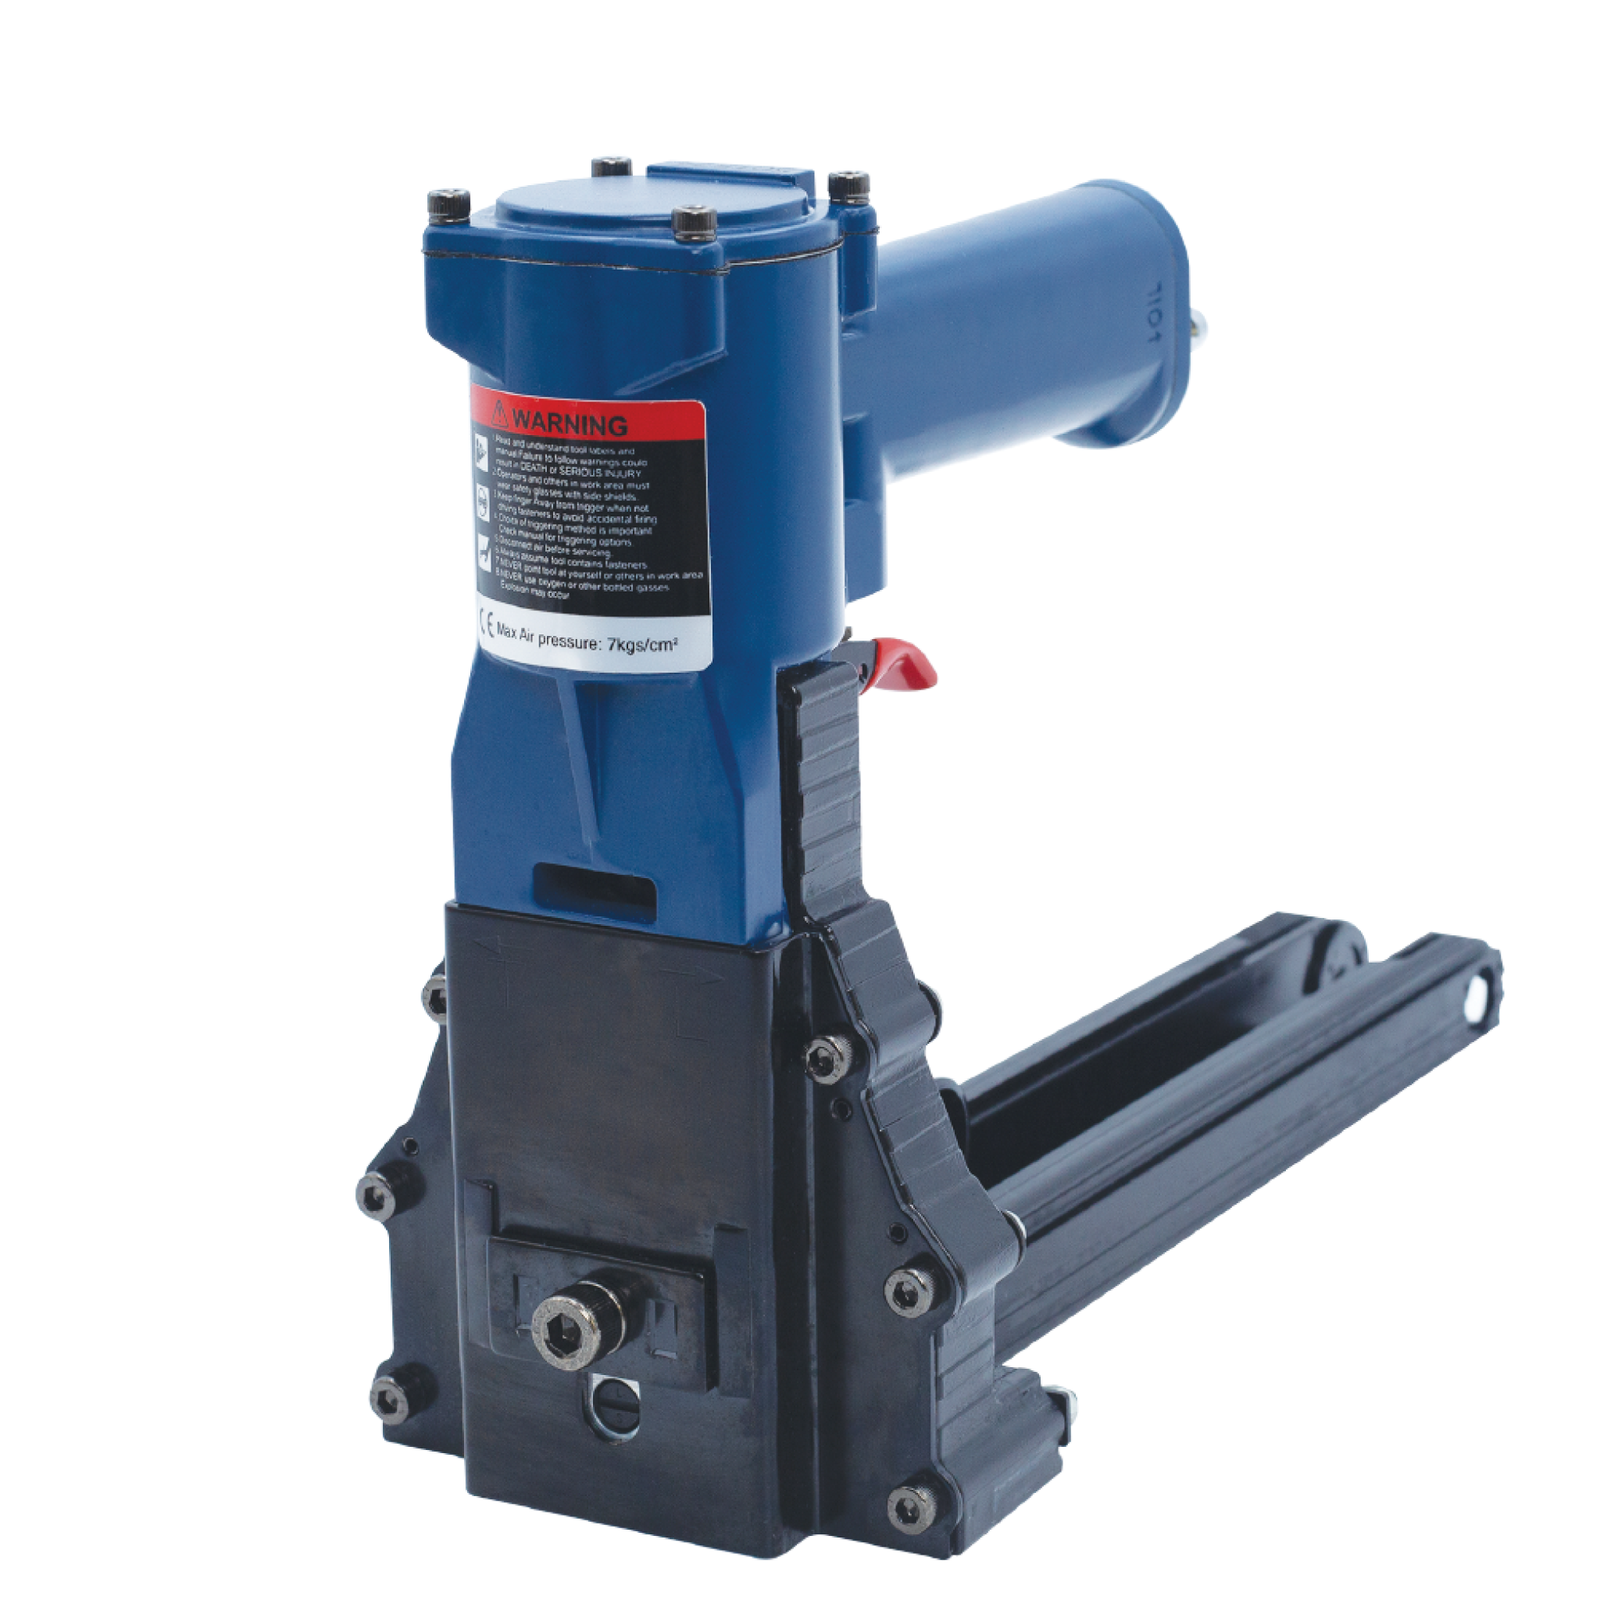 Pneumatic carton stapler gun for boxes compatible with type C staples by JORES TECHNOLOGIES® 